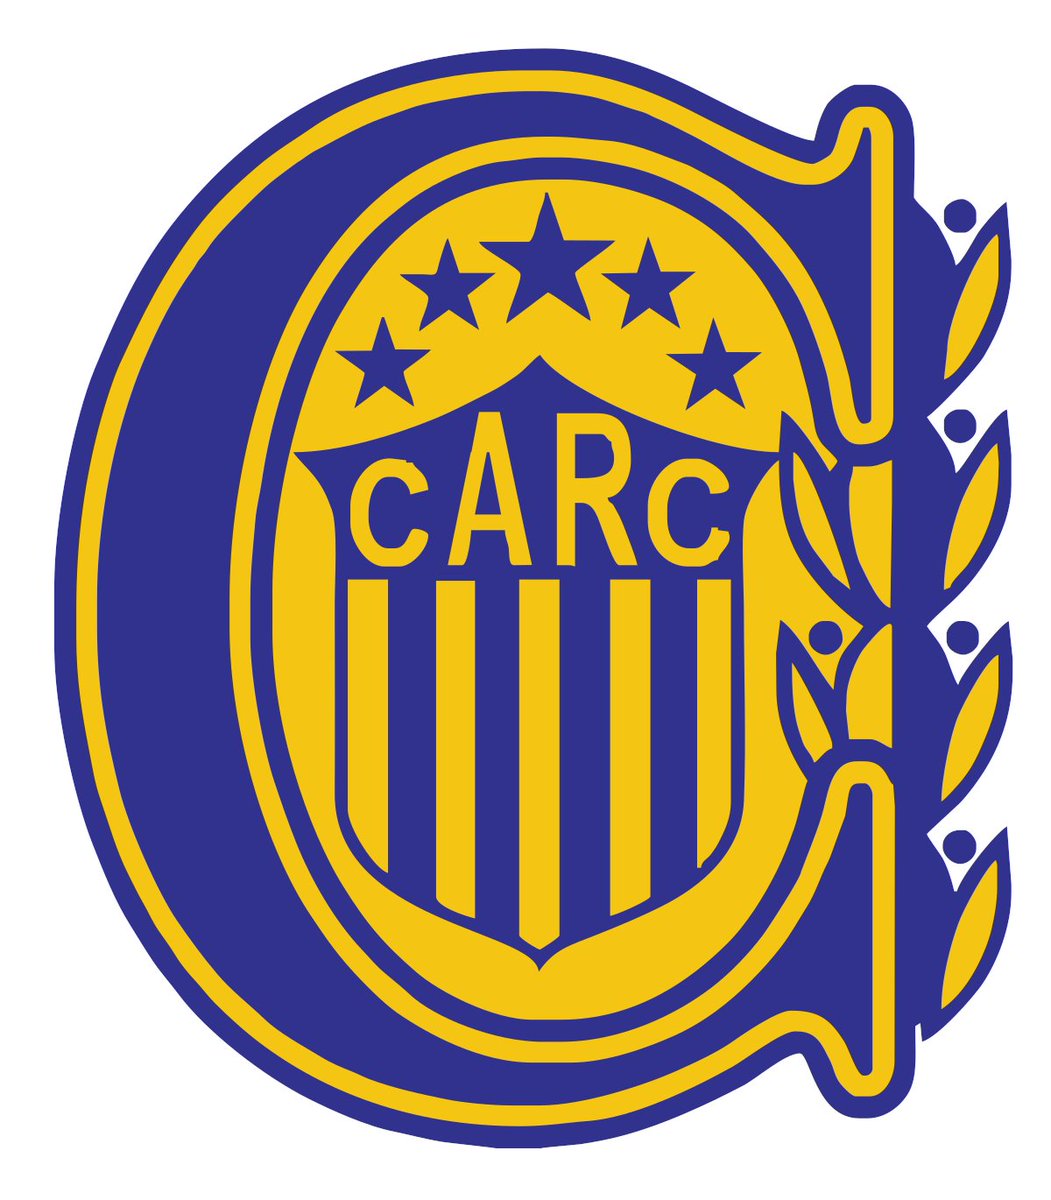 Day 11 of Christmas badges: Argentina.1.  @CAHuracan A historic hot air balloon.2.  @BocaJrsOficial One star for each title.3.  @gimnasiaoficial An Argentinian knight? 4.  @rosariocentral The C is eating the badge!12/26 #Huracán  #BocaJuniors  #Gimnasia  #RosarioCentral